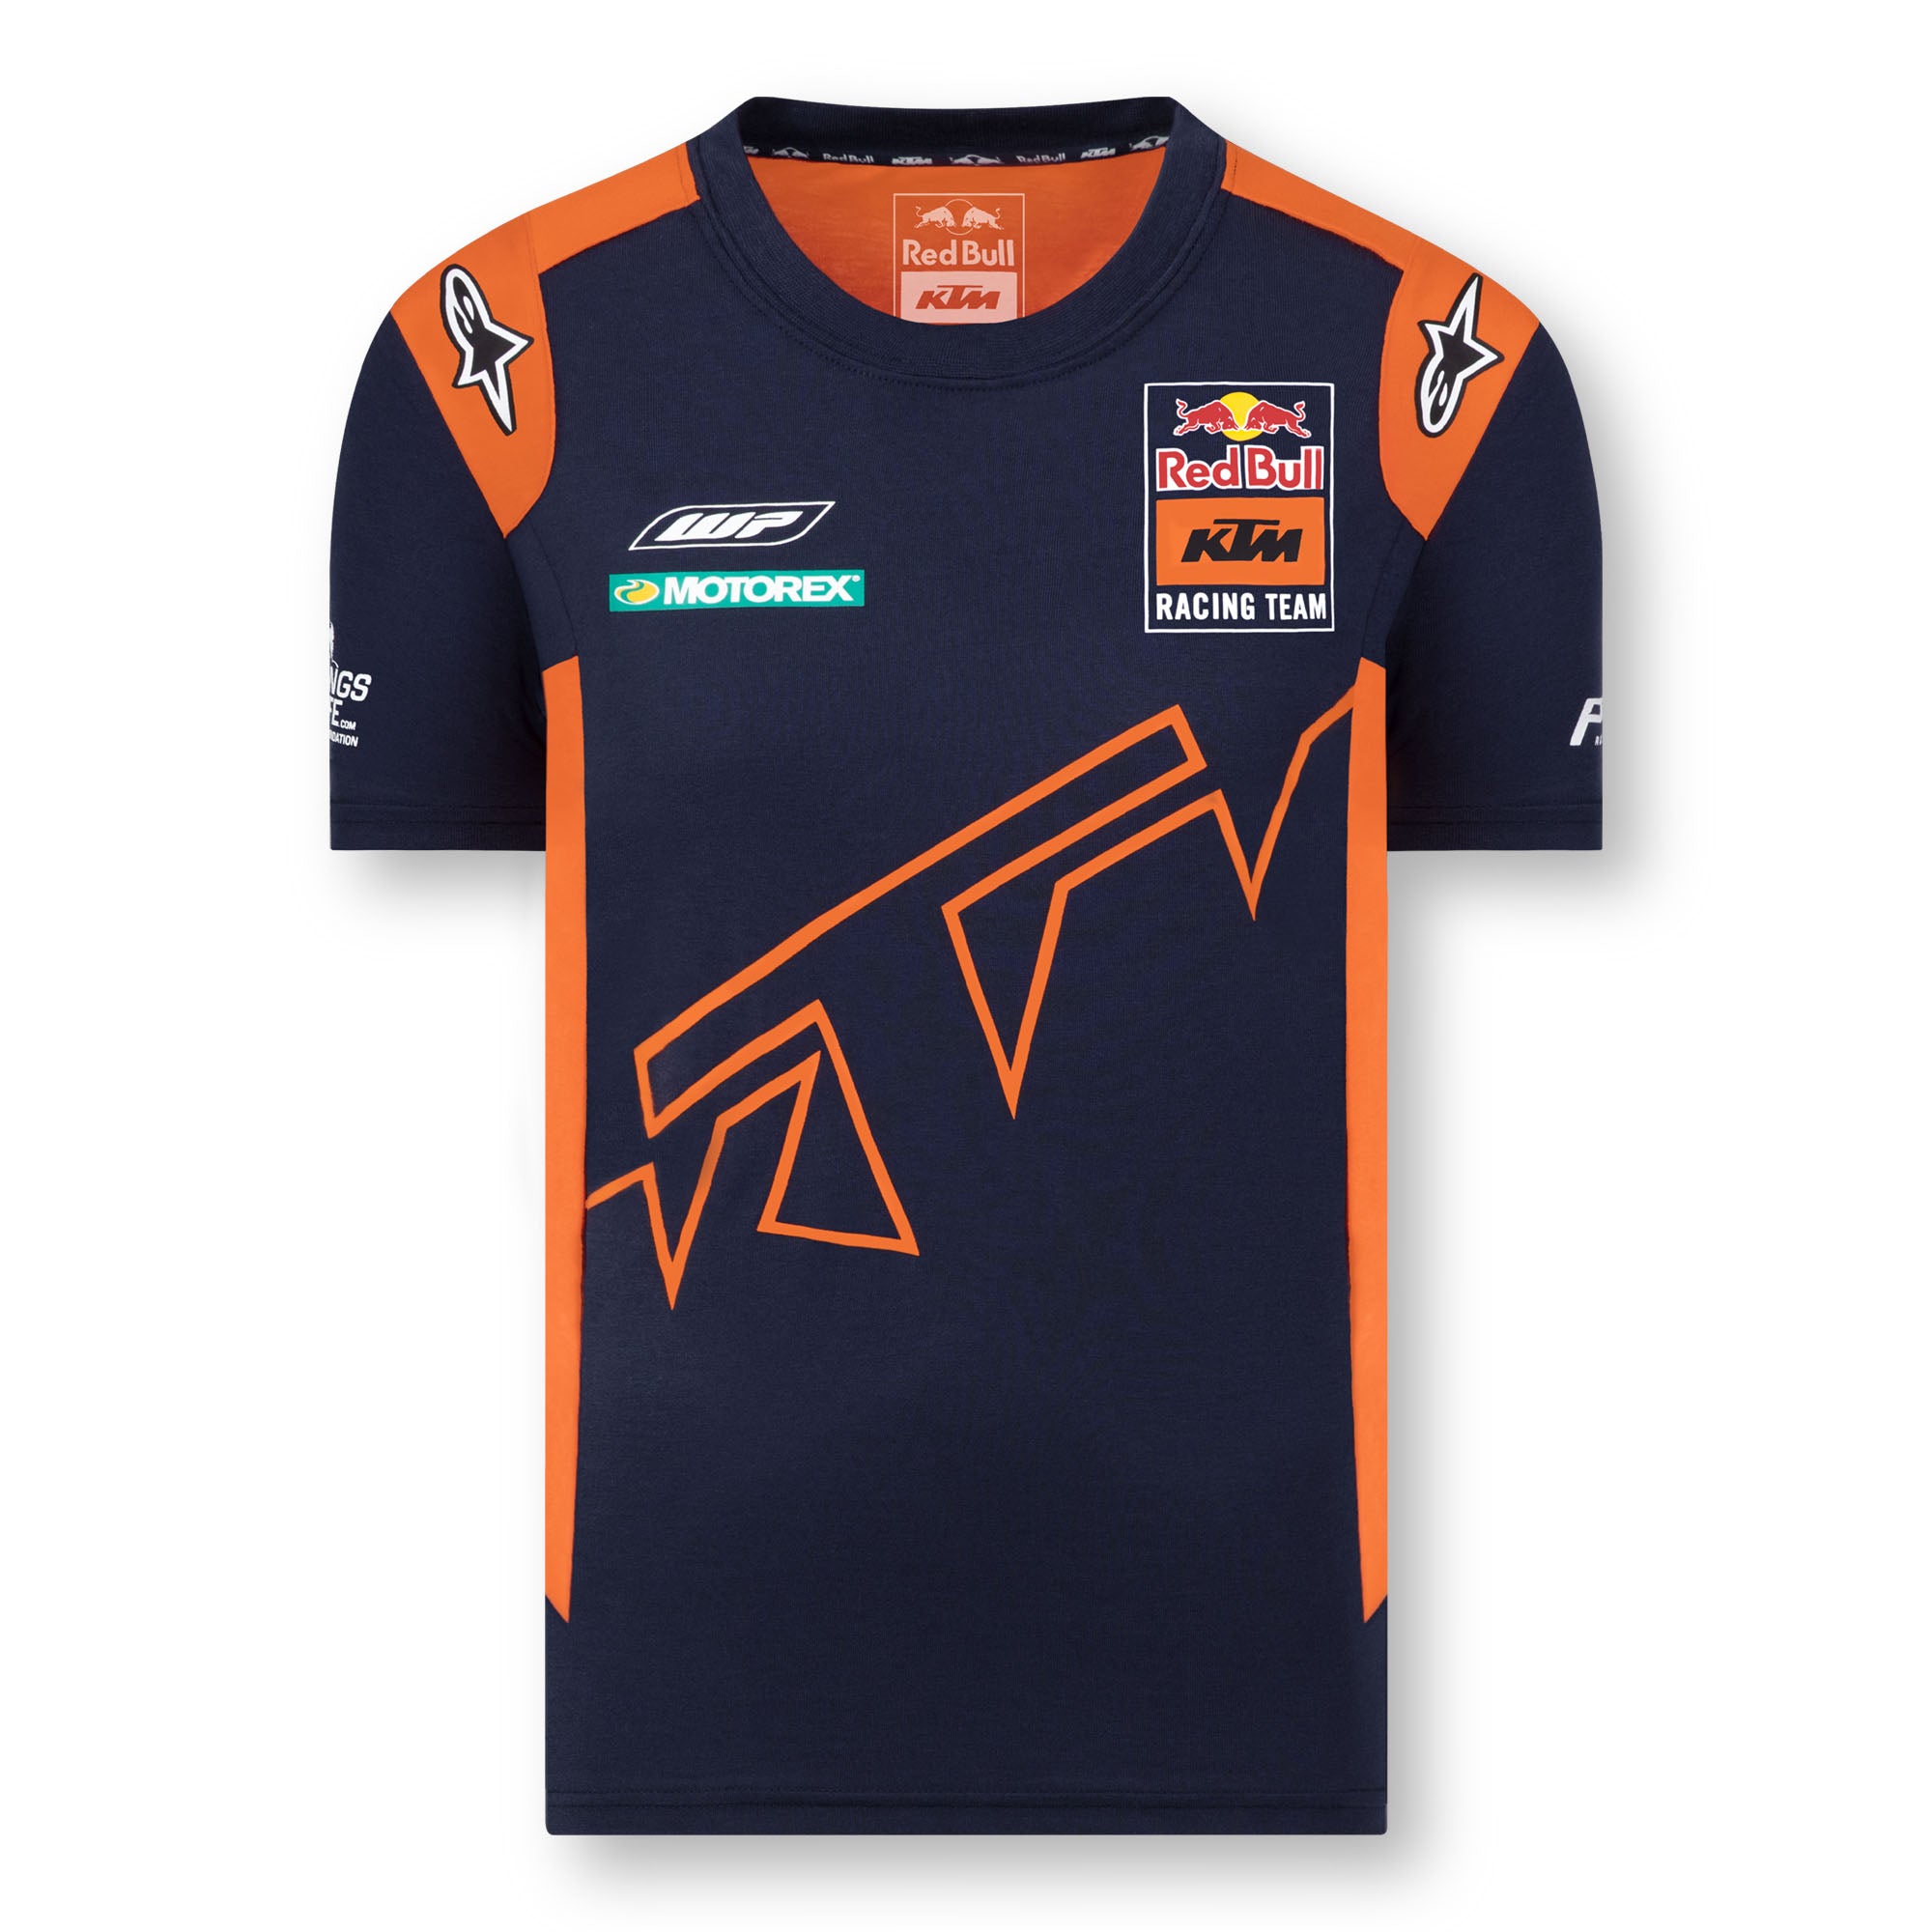 Red Bull Ampol Racing SVG T-Shirt – Red Bull Ampol Racing Official